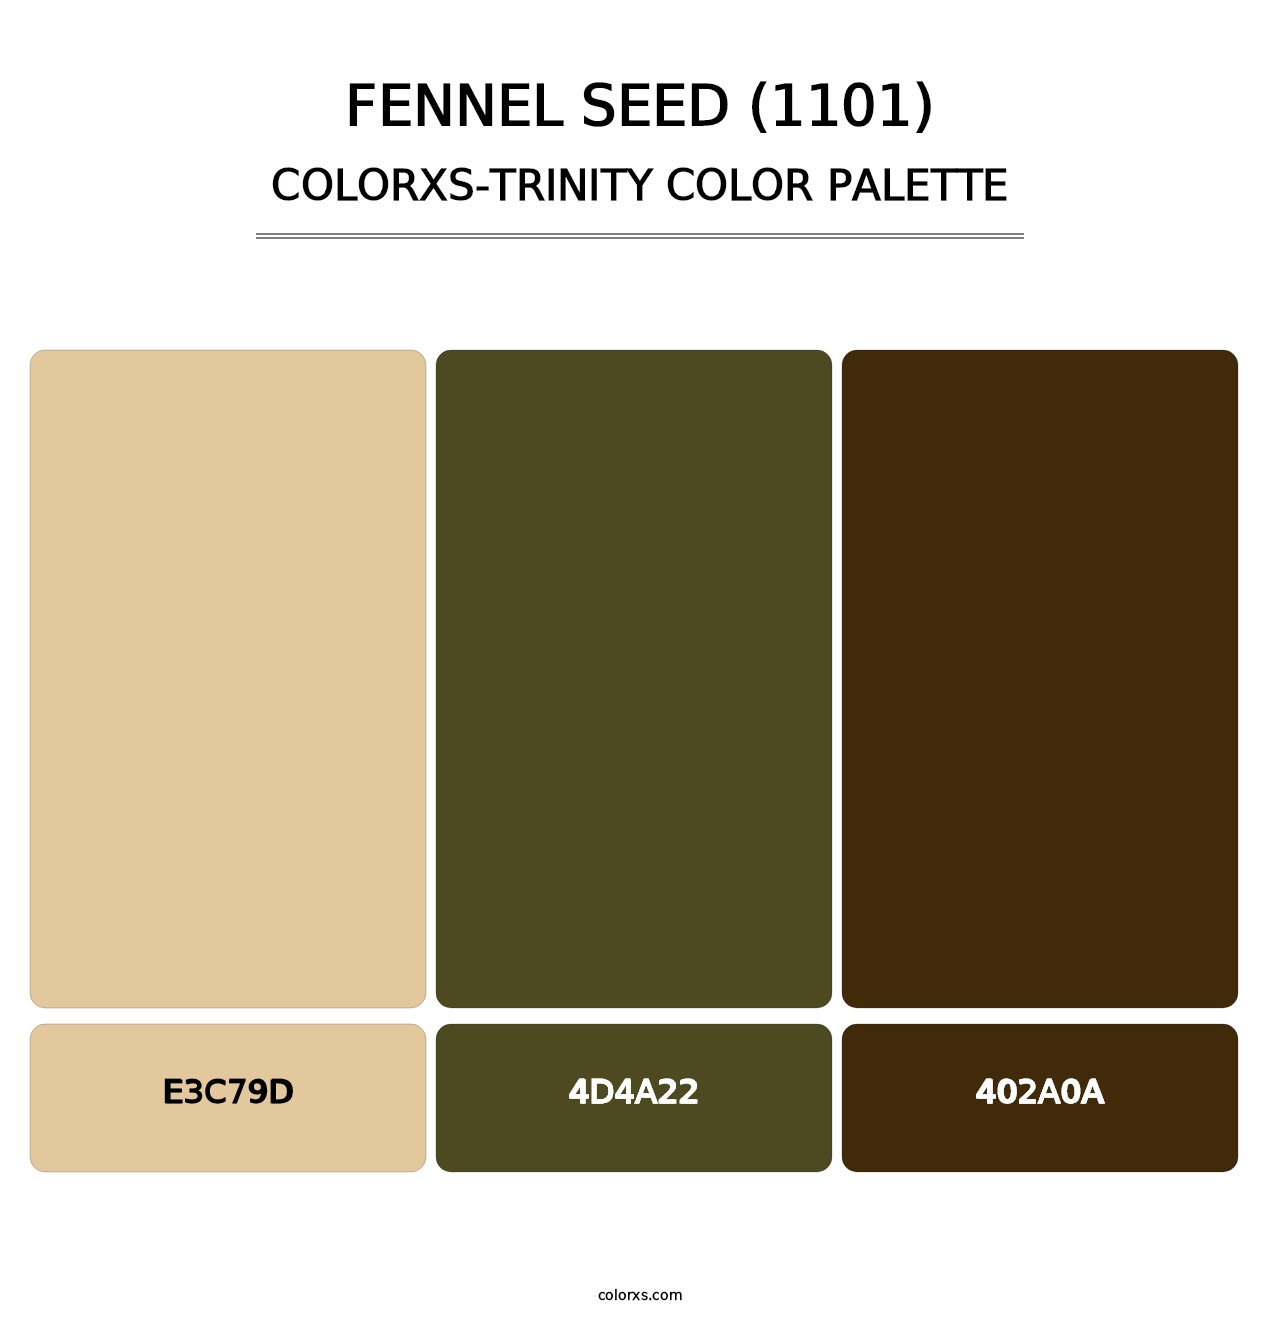 Fennel Seed (1101) - Colorxs Trinity Palette